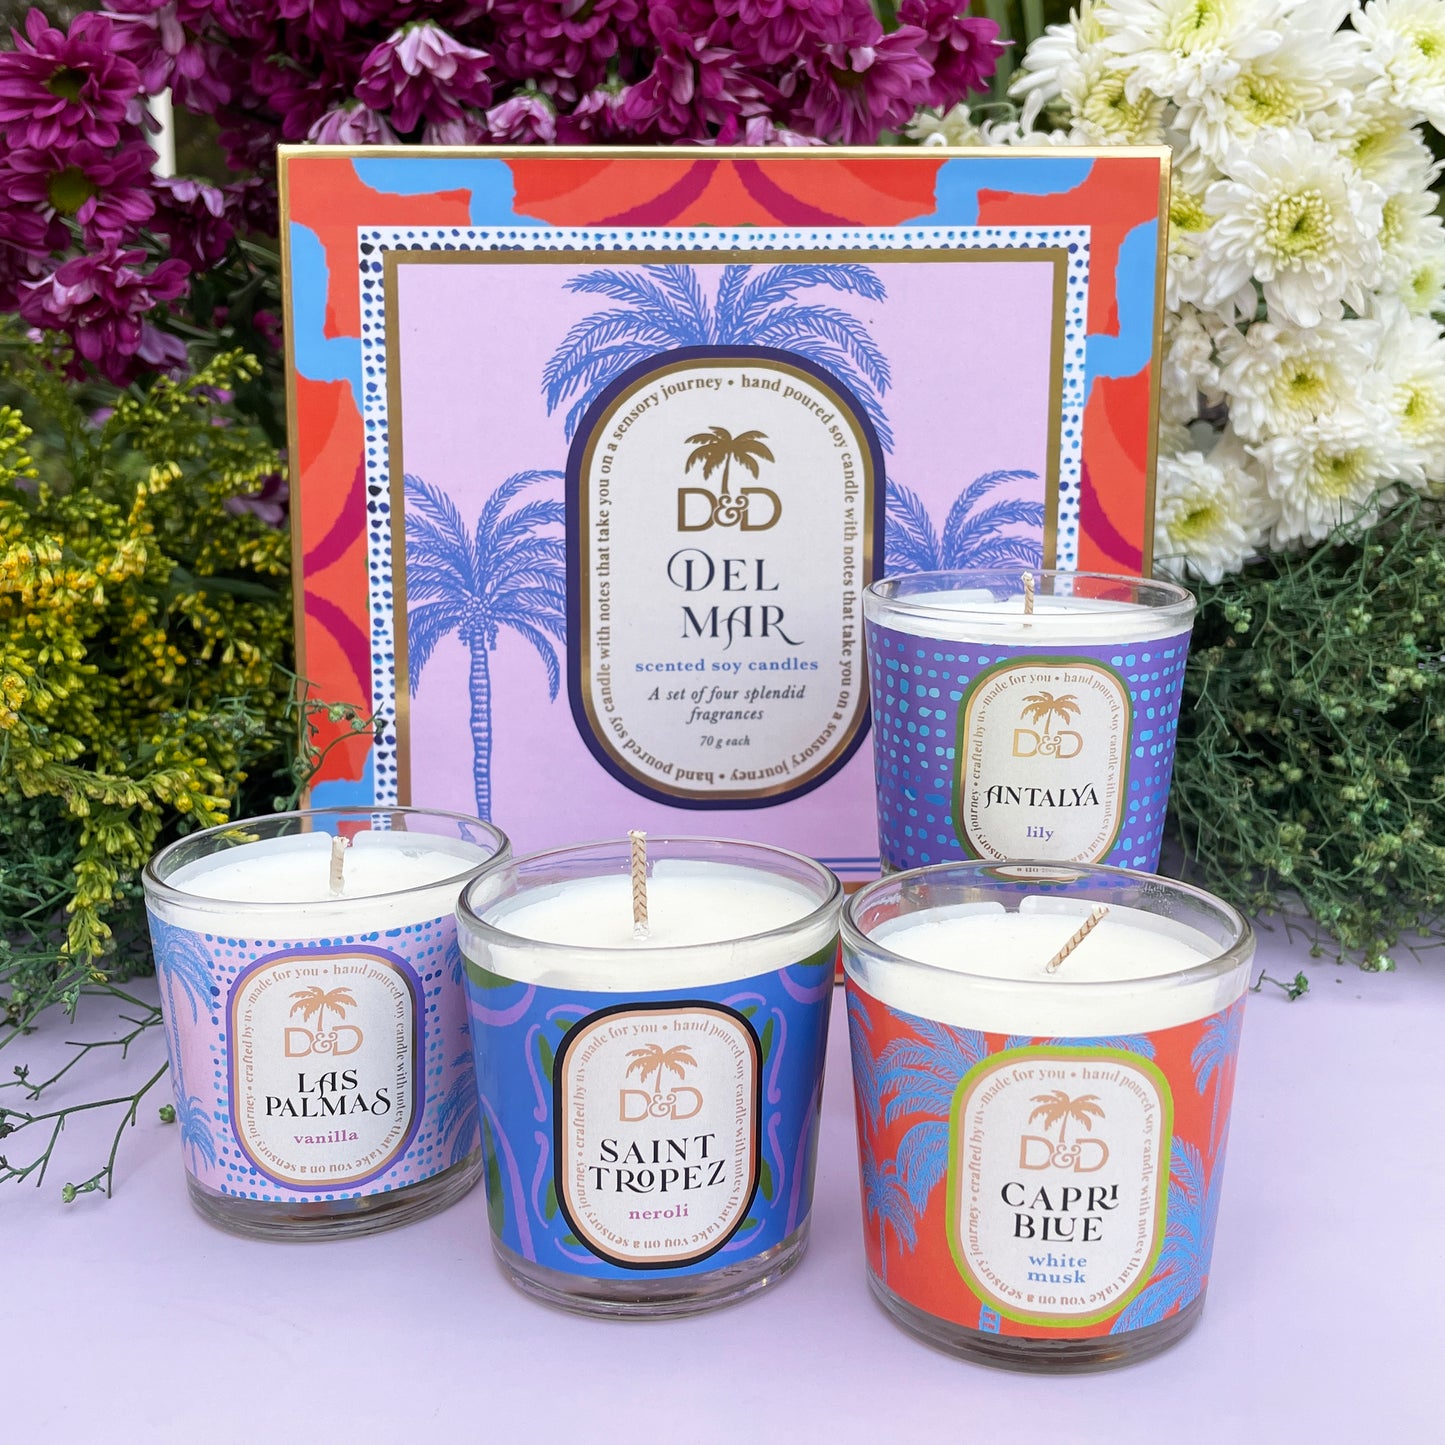 Del Mar set of scented soy candles